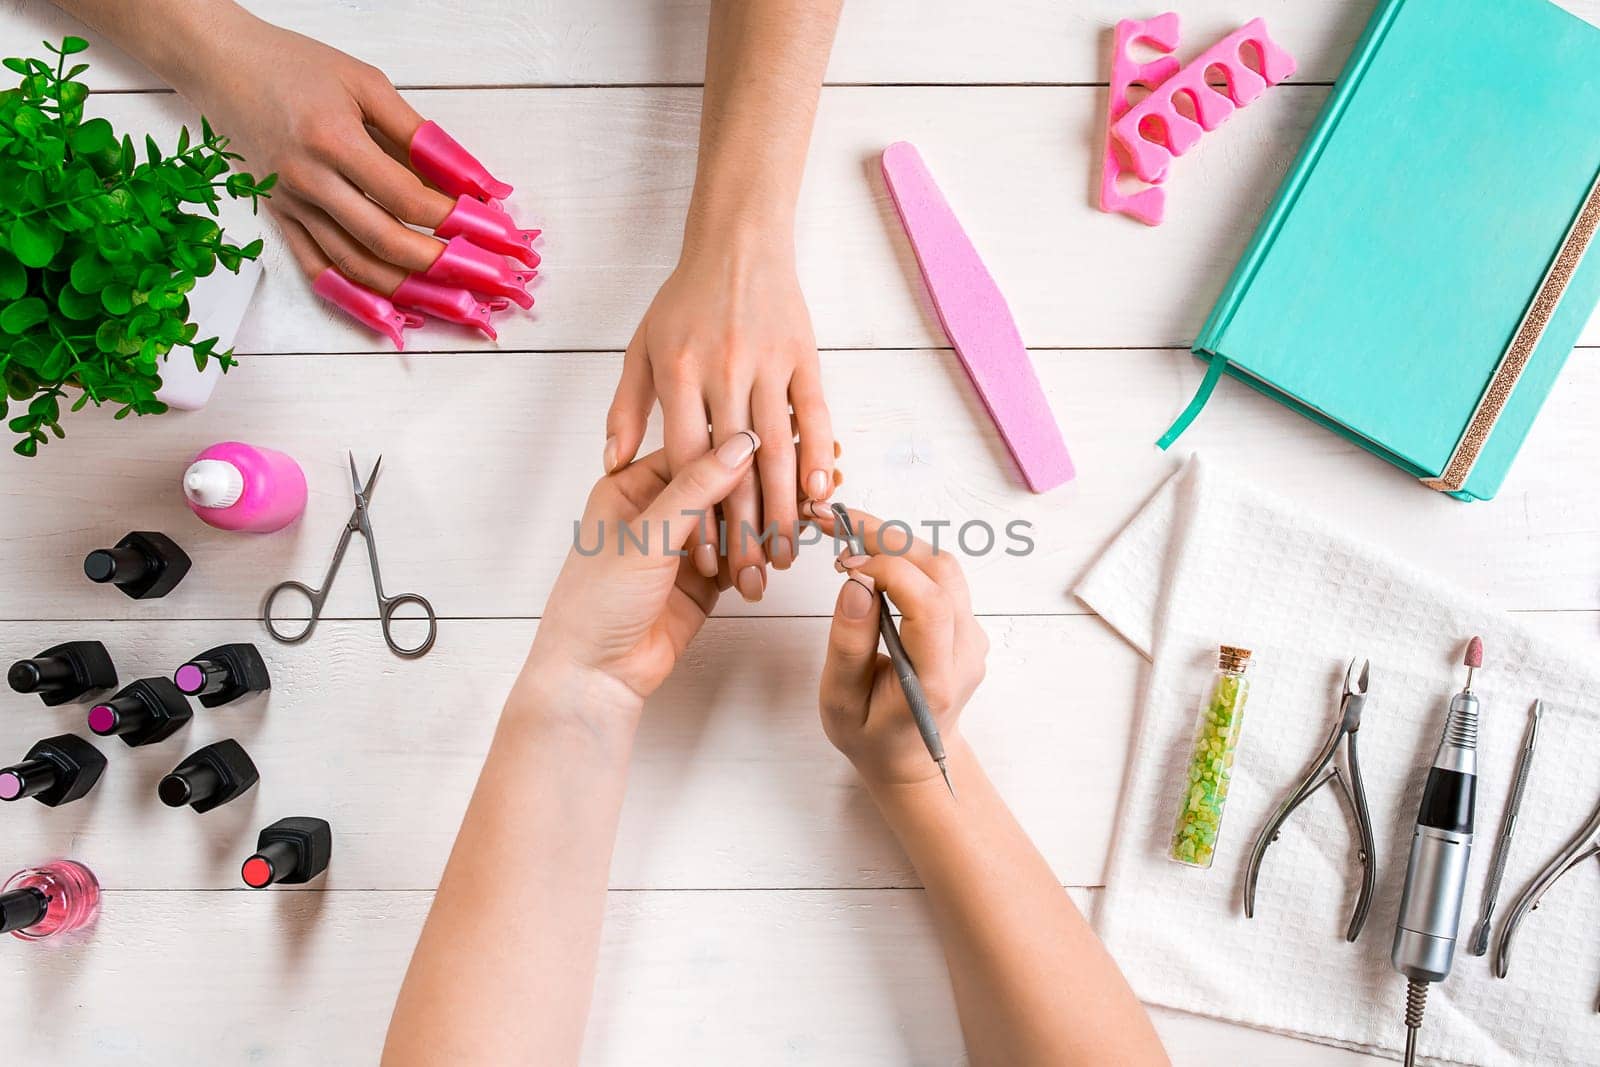 Manicure for the client. Close-up of the hands of a manicurist and client on a wooden background. Nail care. Manicure set and nail polish.